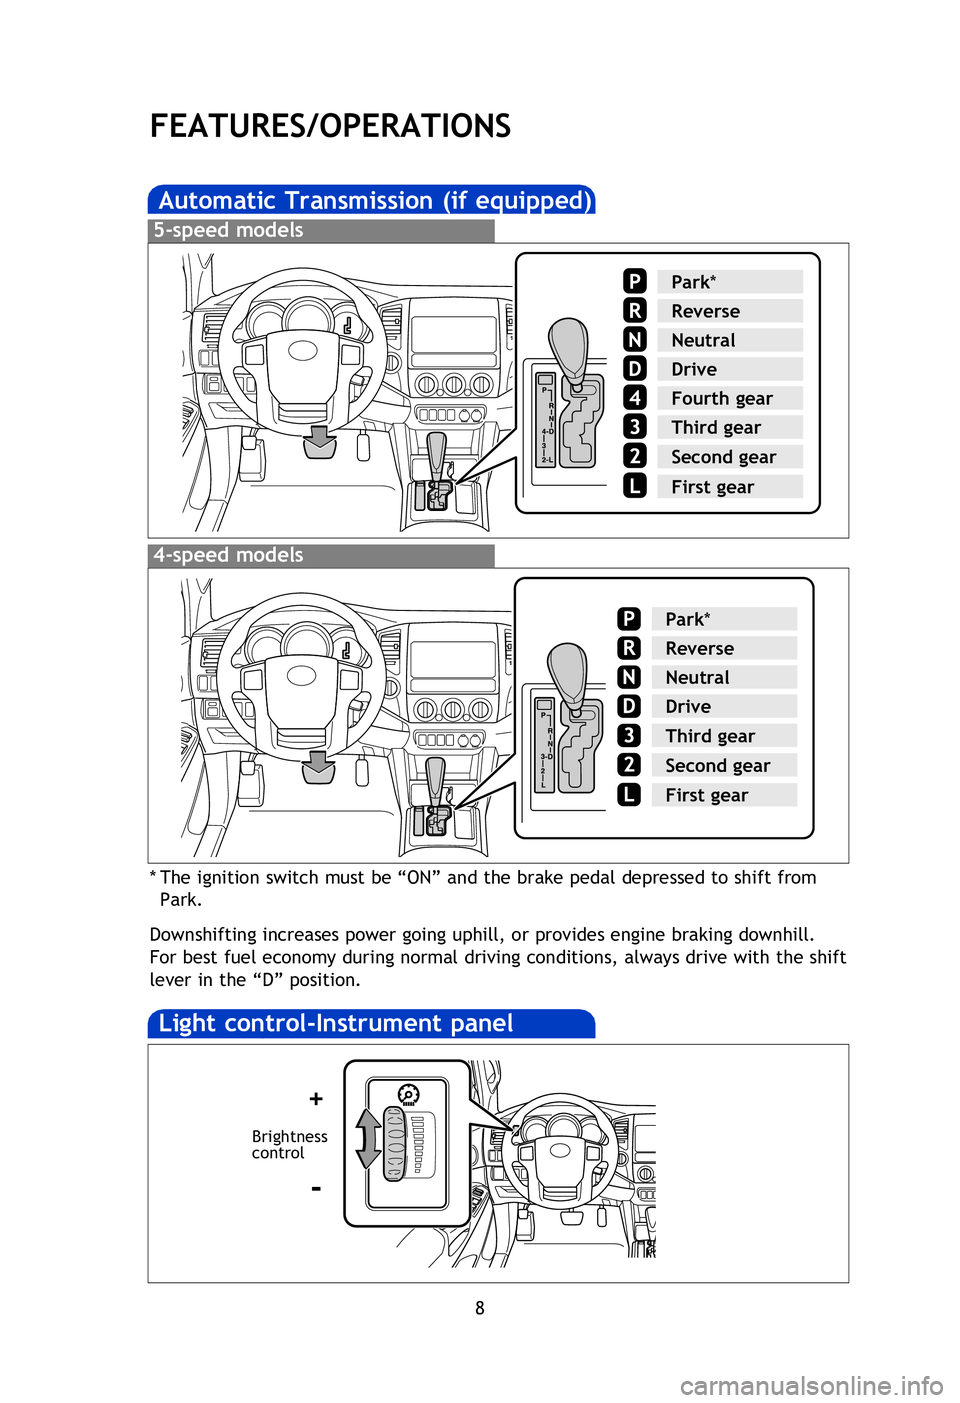 TOYOTA TACOMA 2013  Owners Manual (in English) 8
FEATURES/OPERATIONS
Automatic Transmission (if equipped)
* The ignition switch must be “ON” and the brake pedal depressed to shift from 
Park.
Downshifting increases power going uphill, or provi